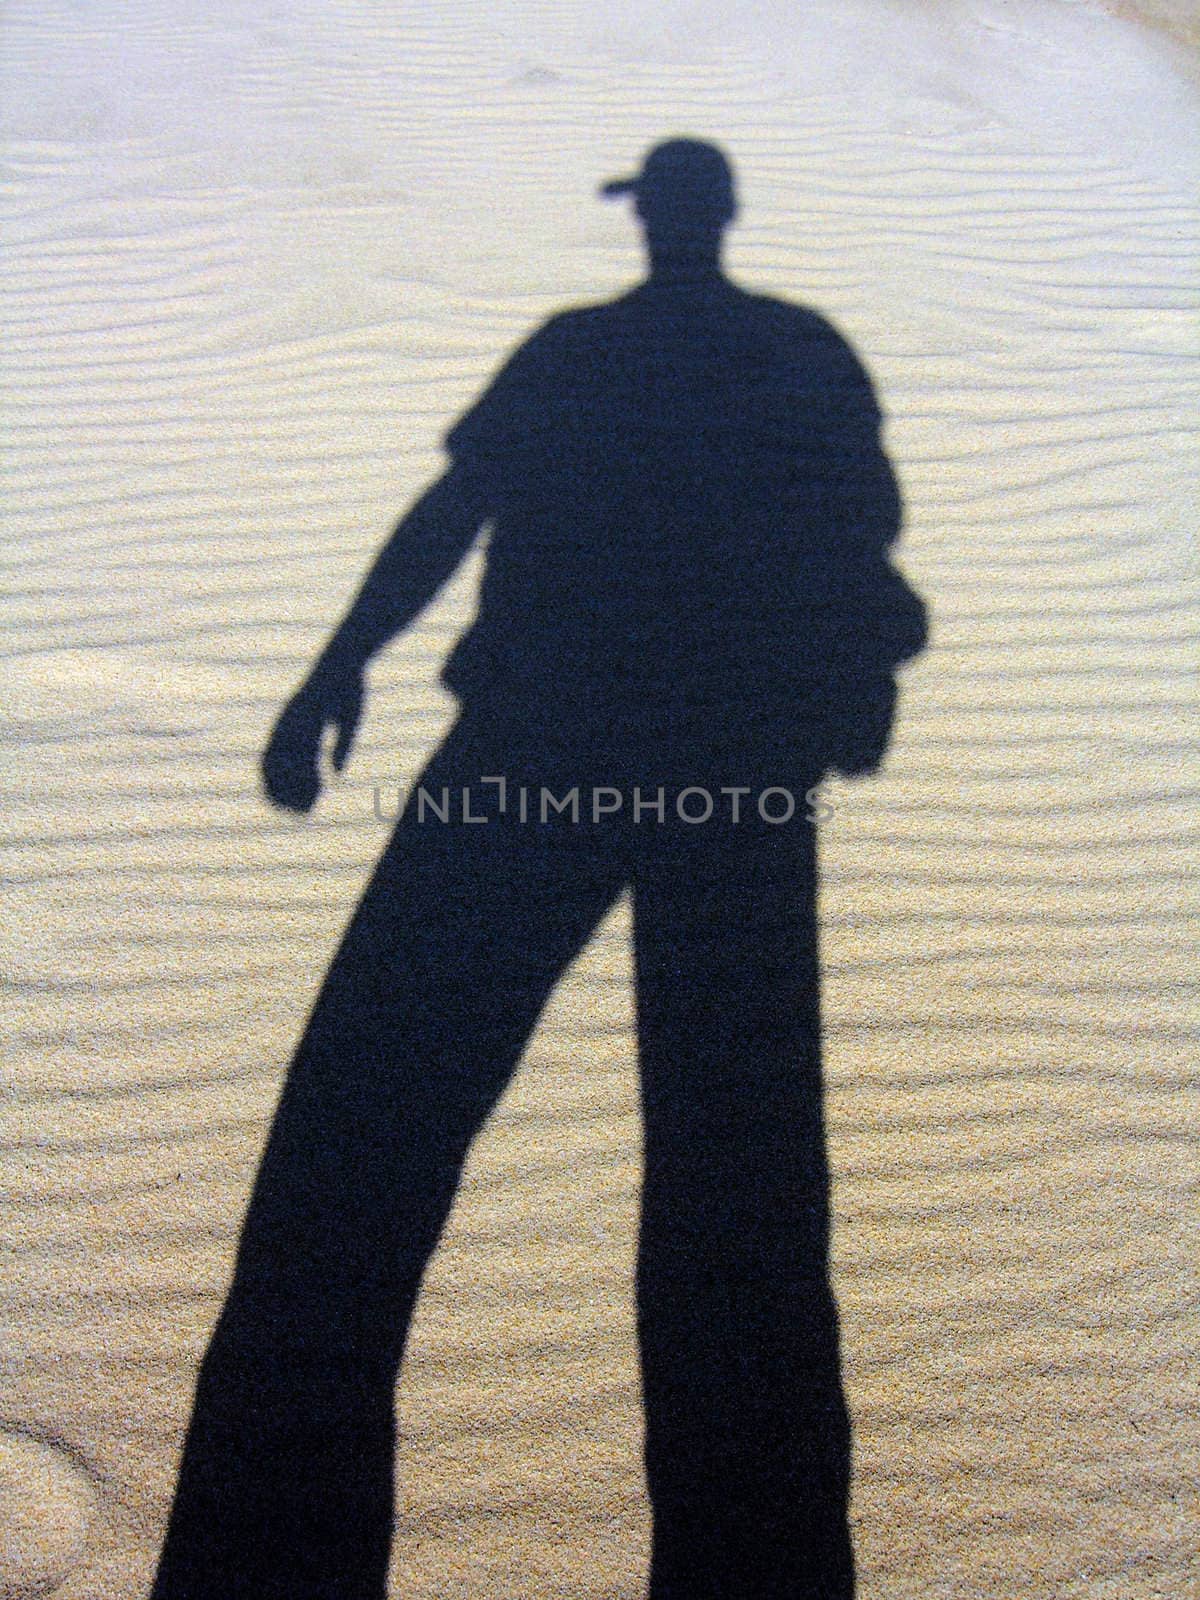 Shadow of a man reflected on the sand.